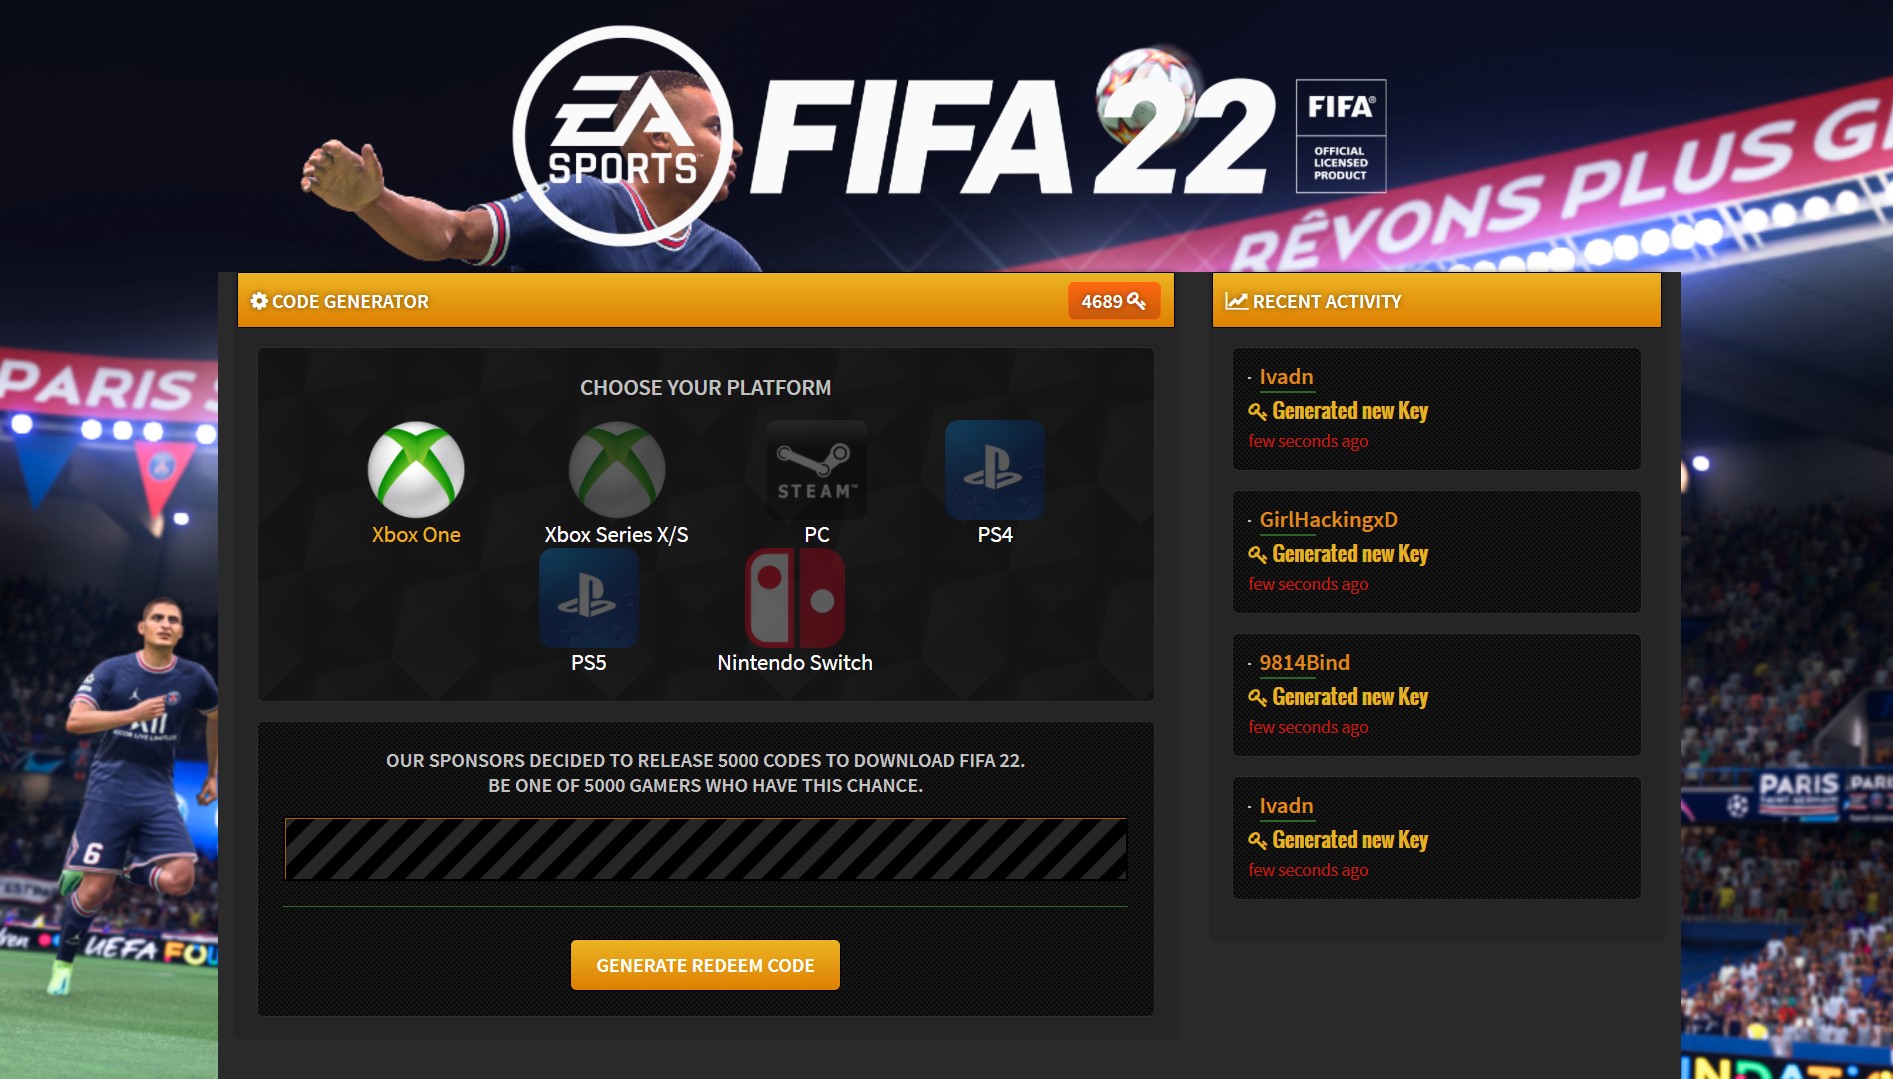 Fifa 22 Product Key Generator Free Download for Pc Ps4 Xbox One - Fifa 22  Product Key Generator Free Download for Pc Ps4 Xbox One Free Download [ No  Survey ] Download